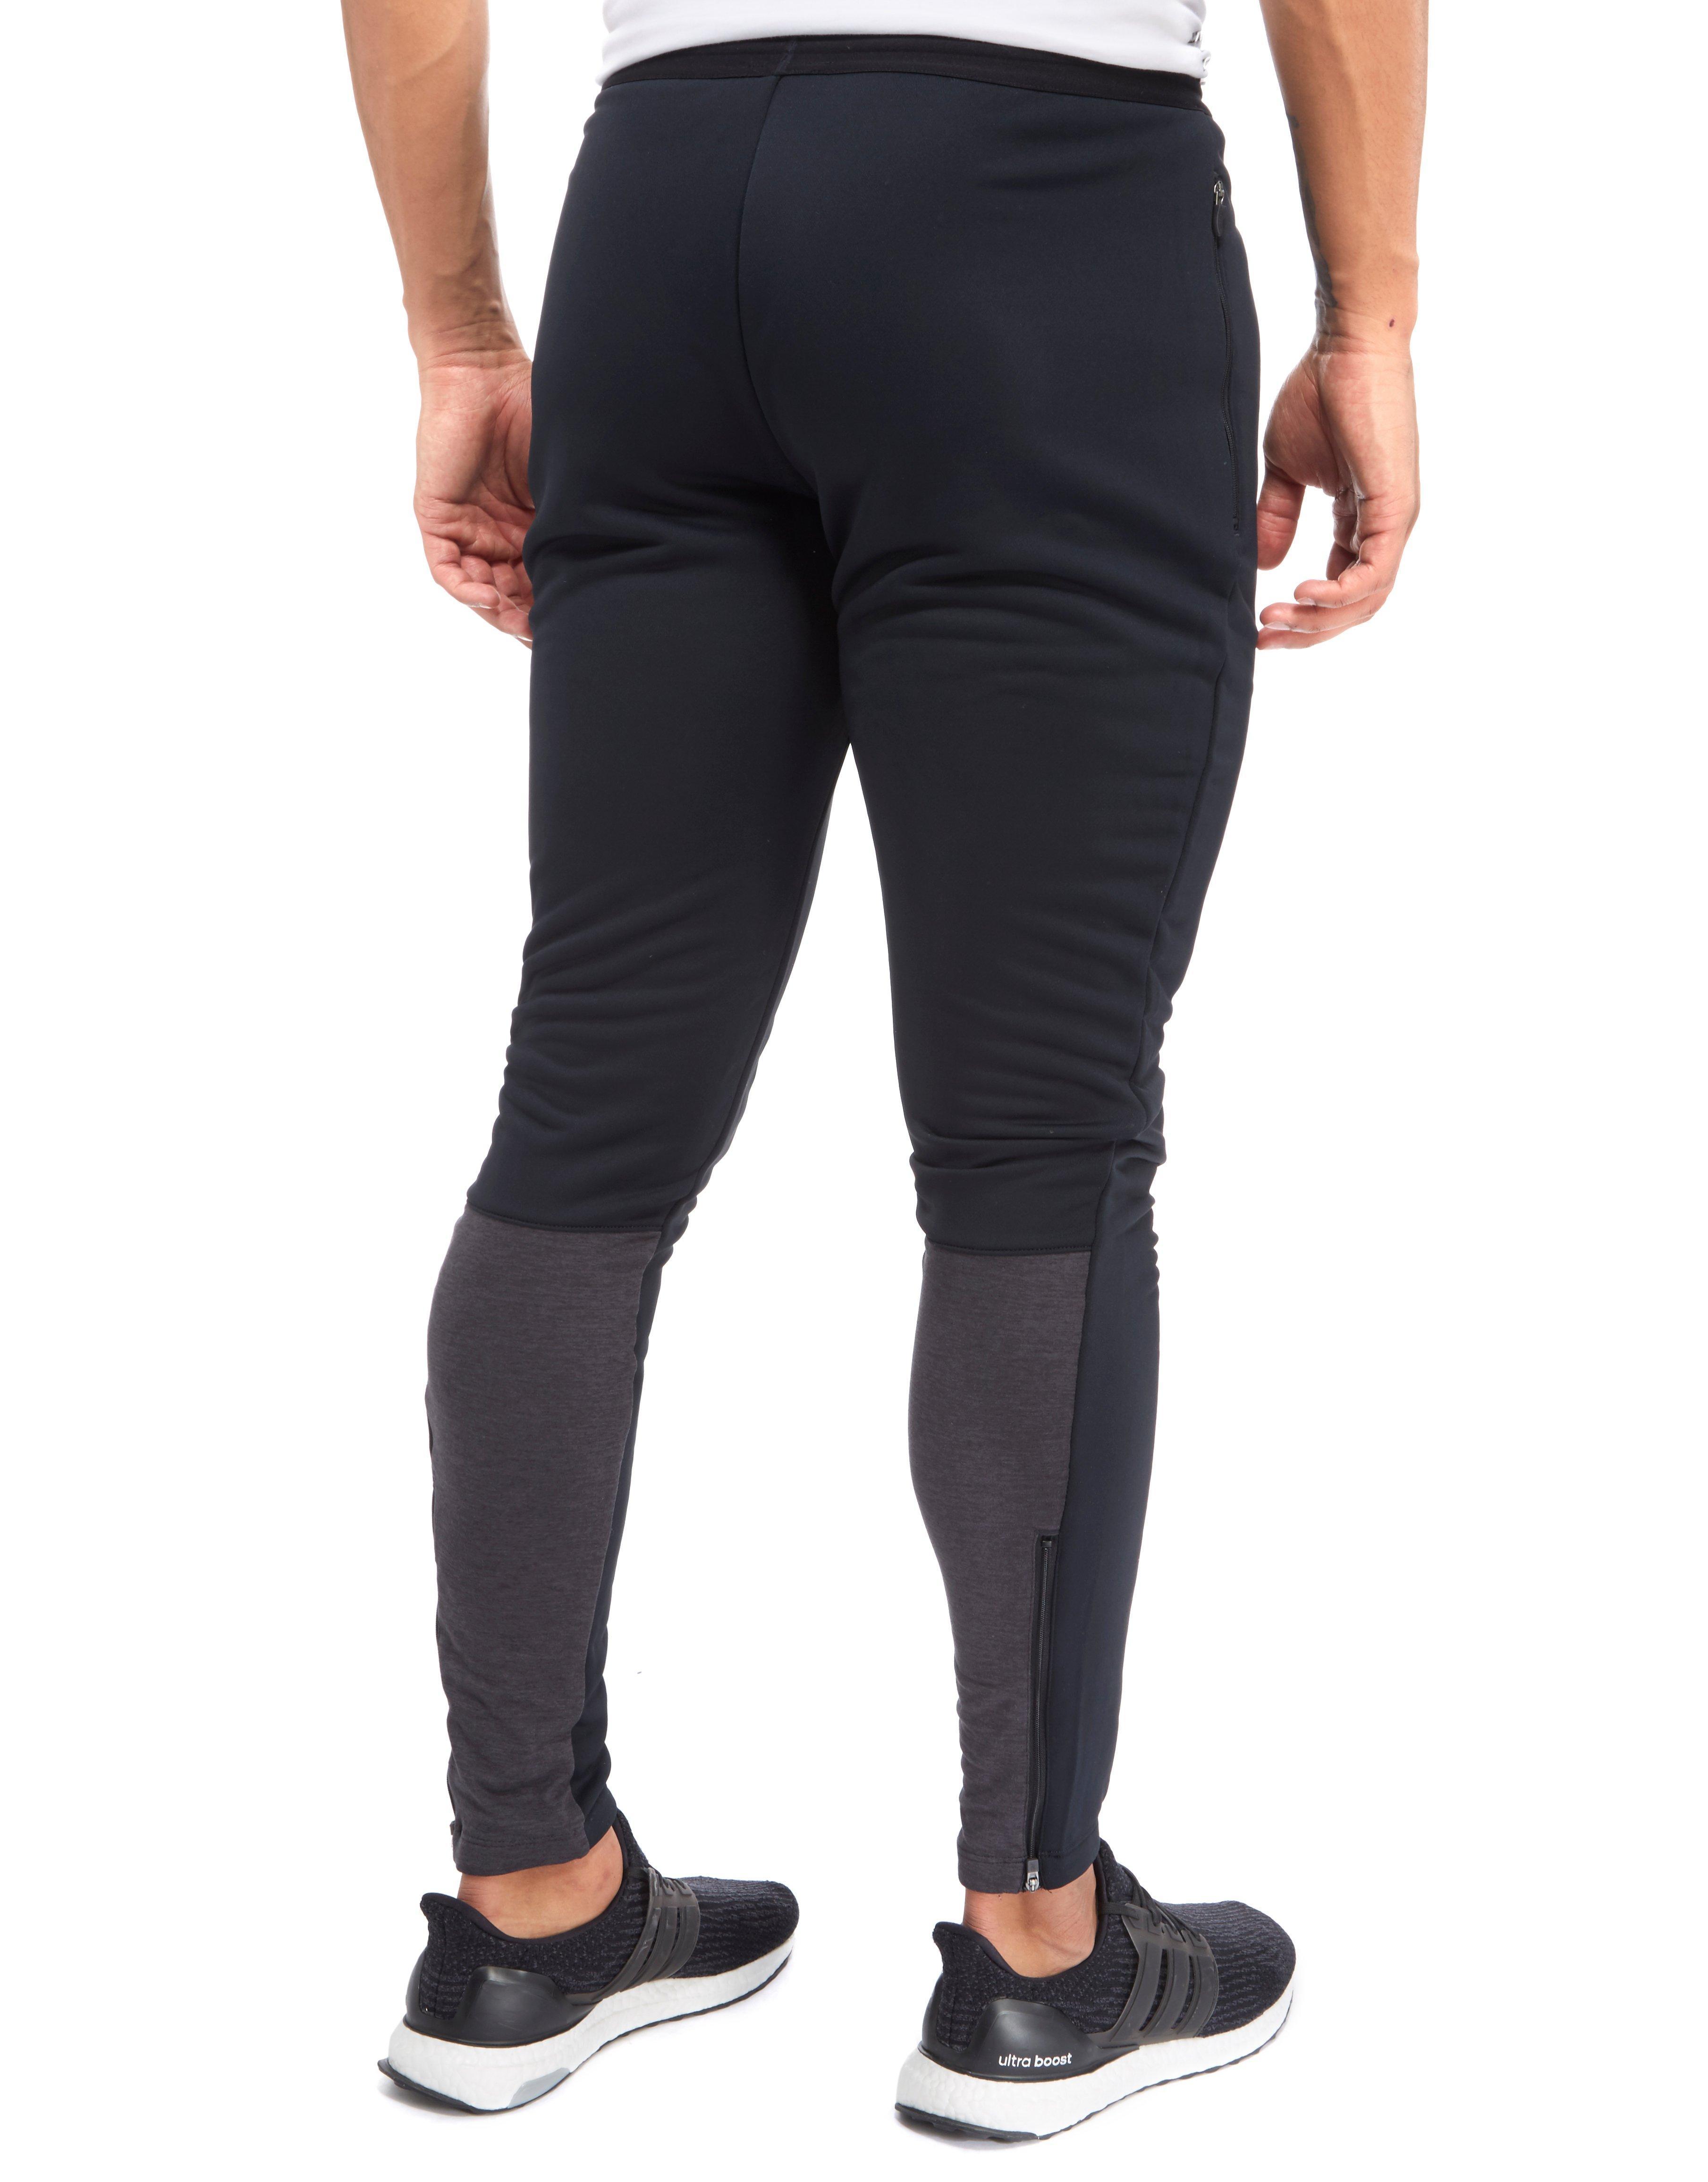 5 Day New Balance Workout Pants for Women